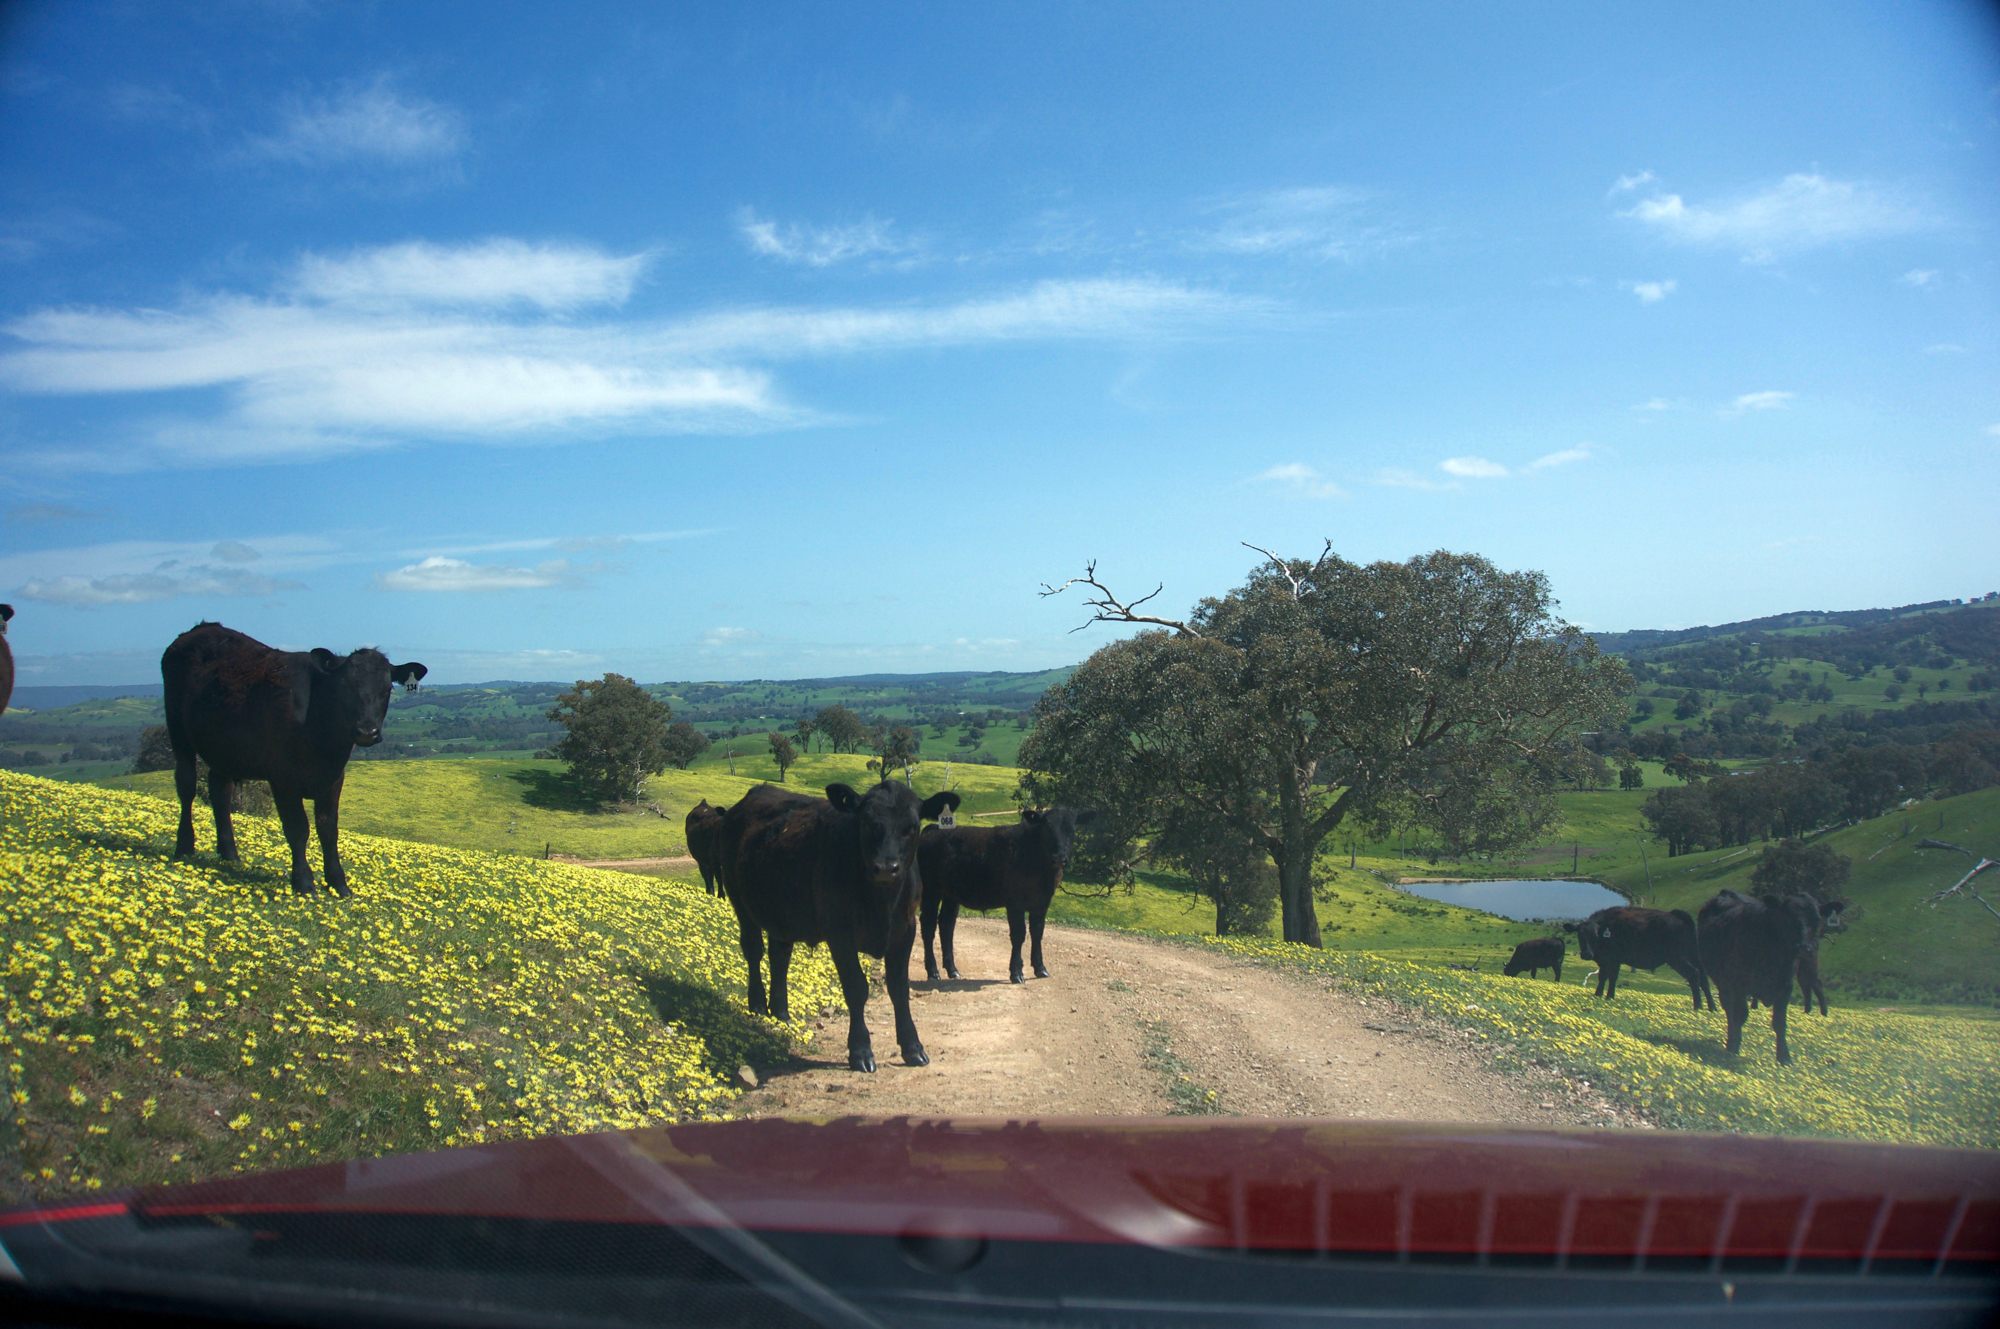 Four cows stare directly at the camera, which is pointing through the front windshield of a car. Two are standing on a dirt road, blocking the car, while the other two (and various others) stand nearby in the undulating, flower-and-grass-covered field.